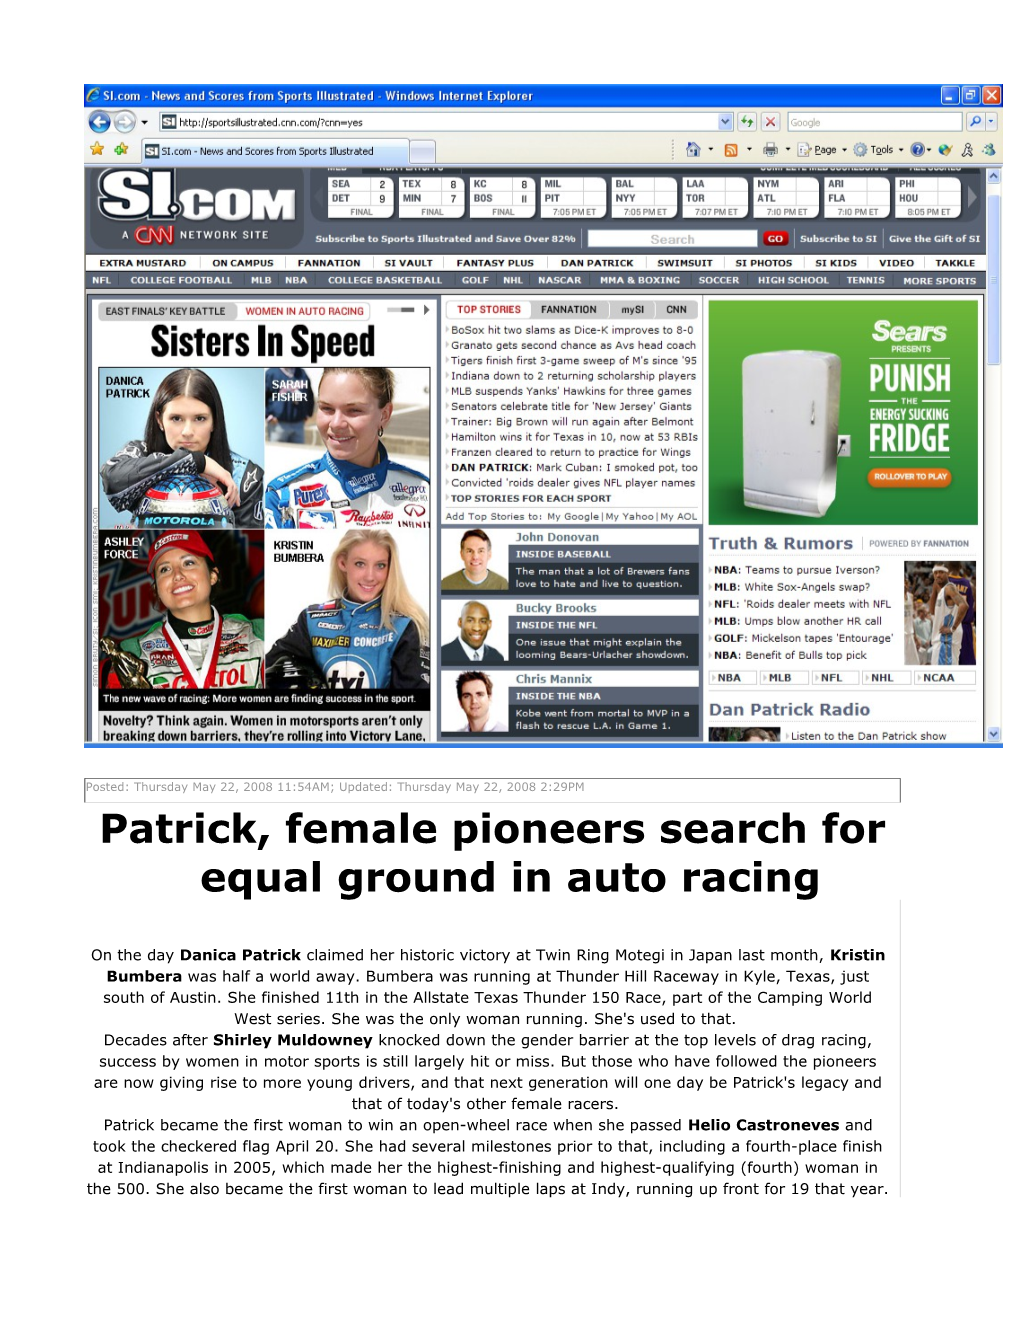 Patrick, Female Pioneers Search for Equal Ground in Auto Racing